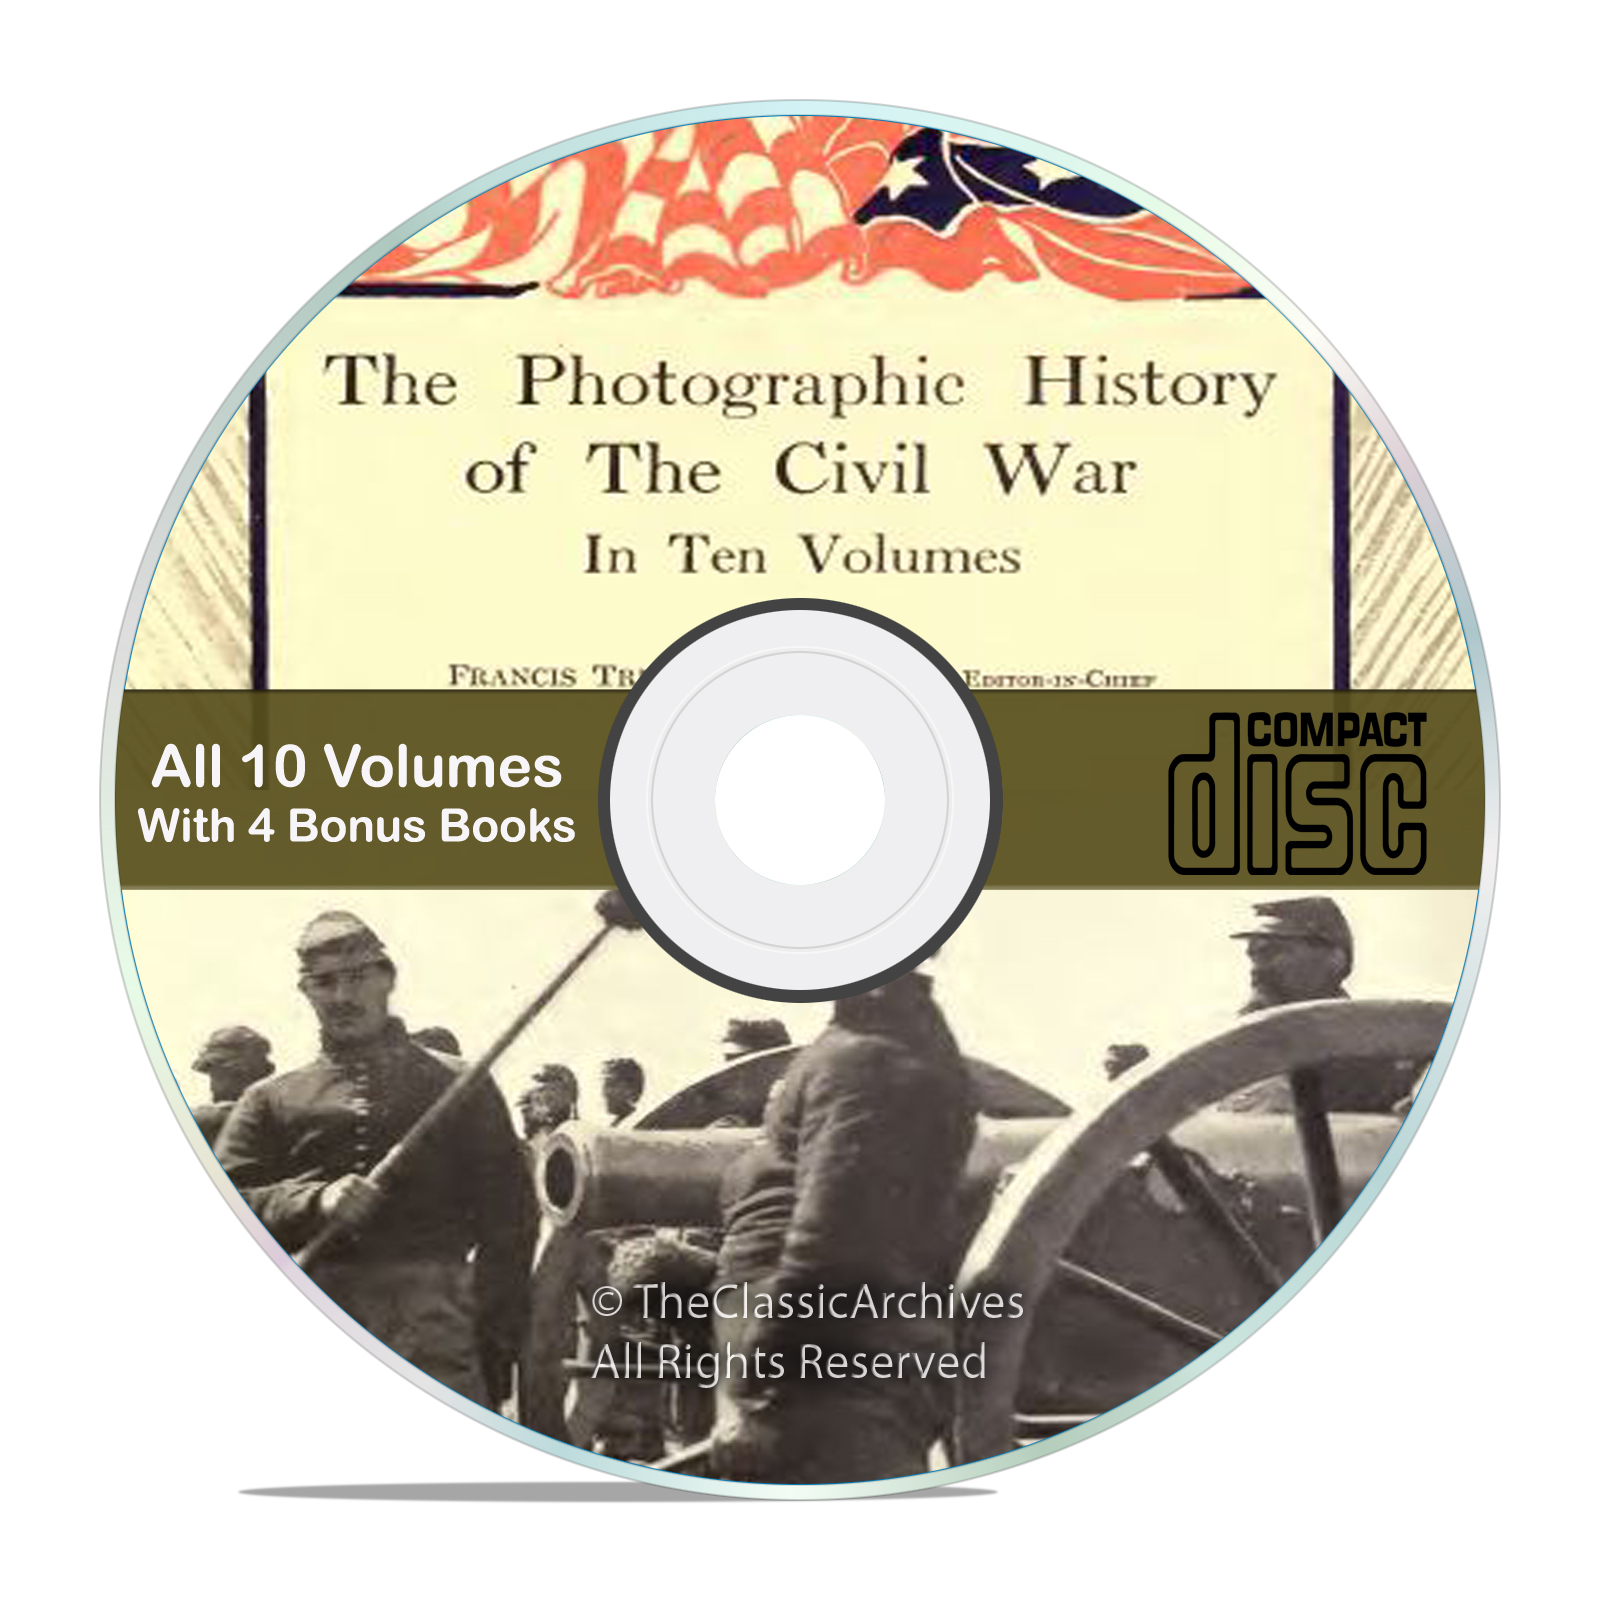 The Photographic History of the Civil War, 10 vol. set, pics, Books on CD